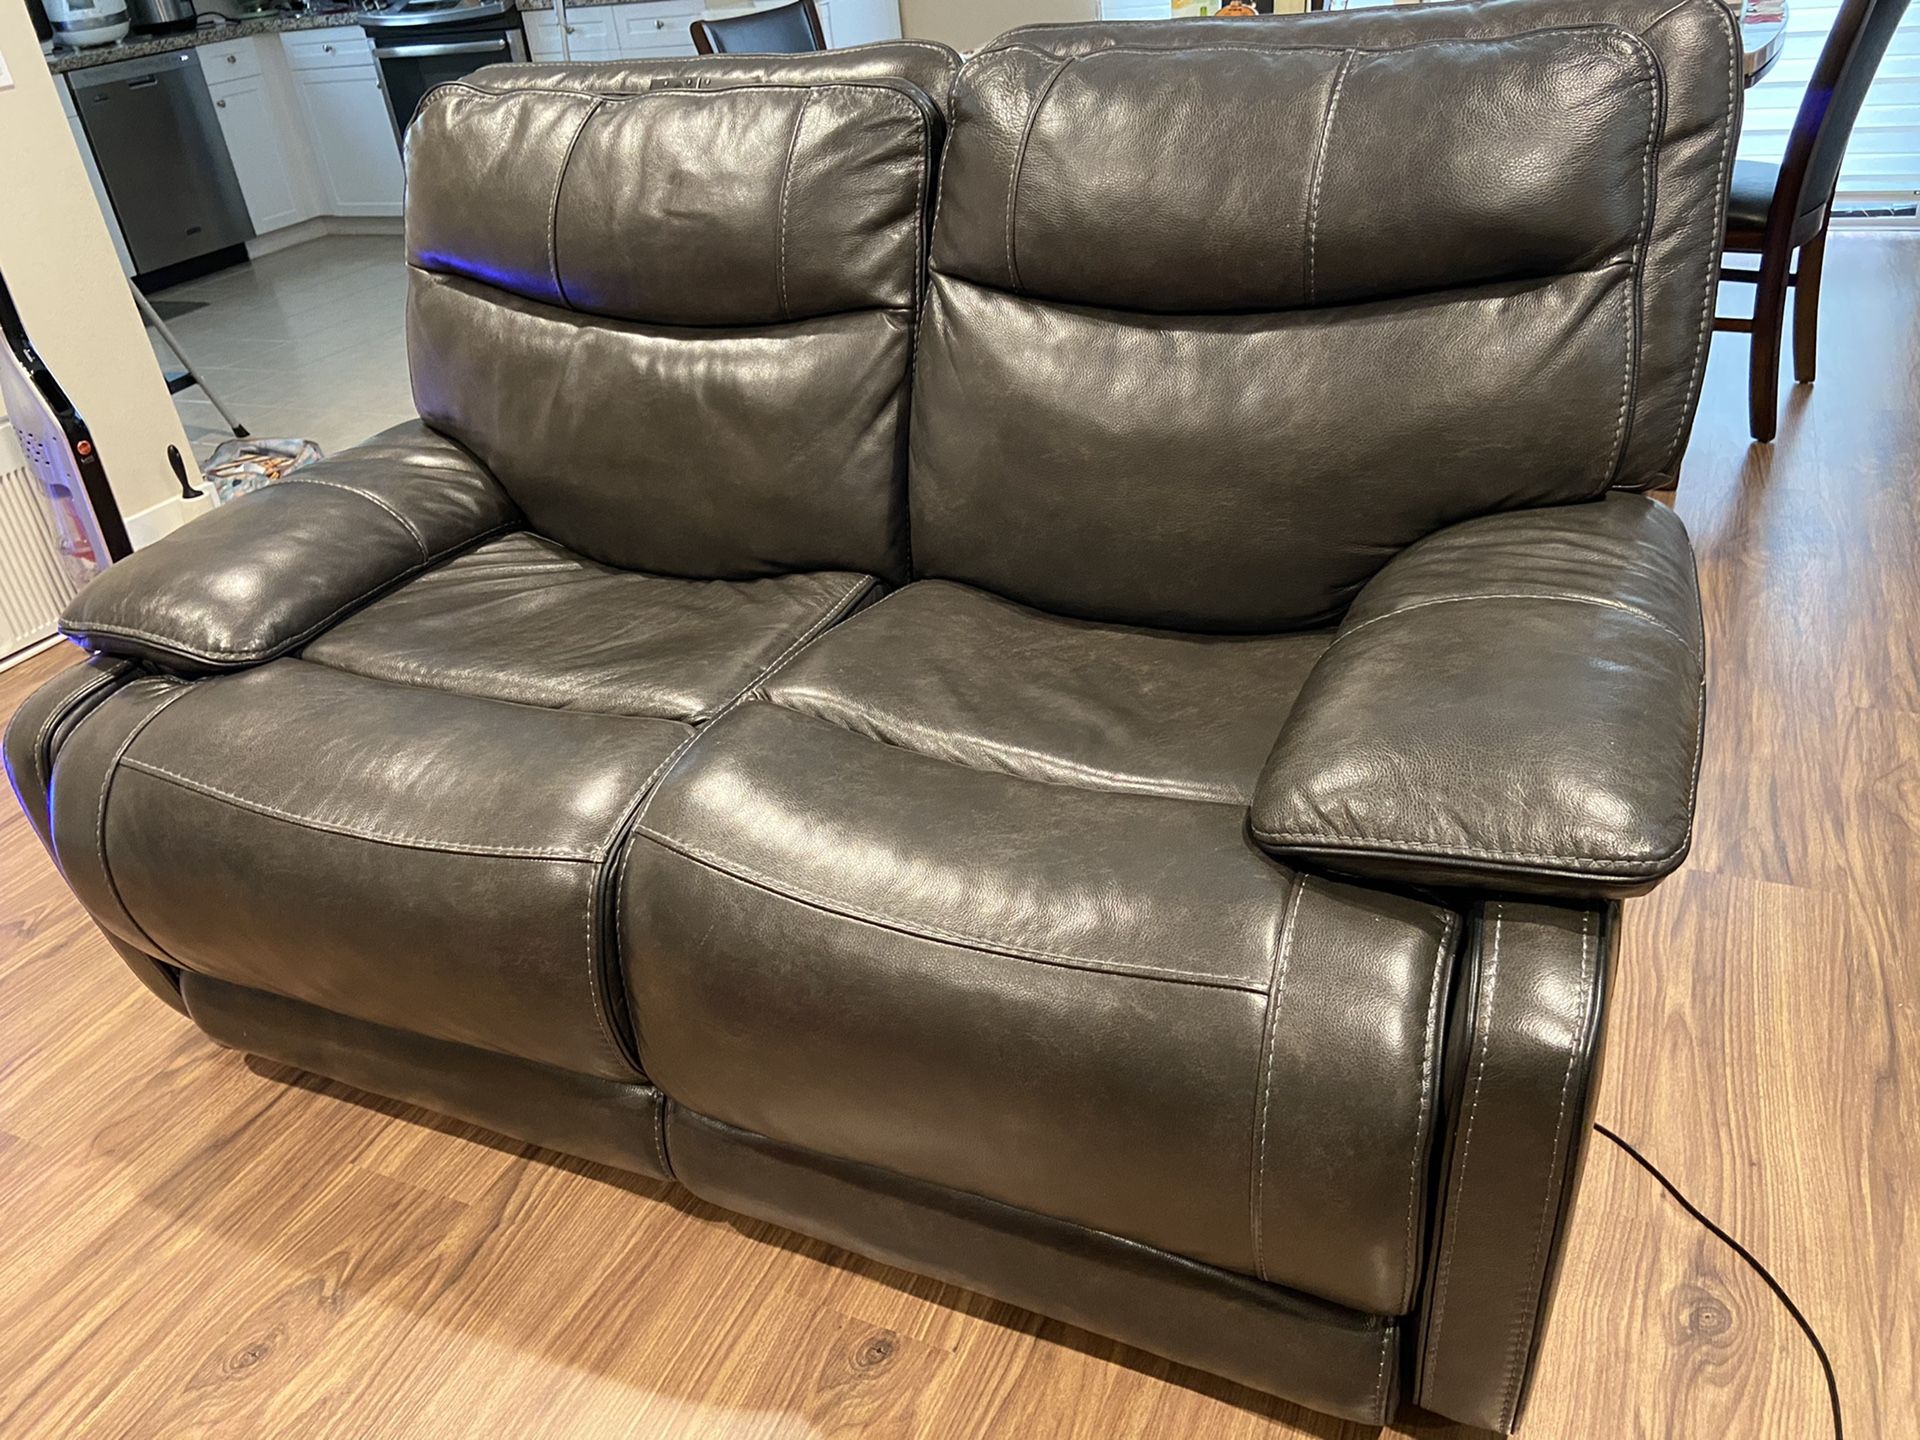 Power reclining leather sofa (3 person sofa and 2 person love seat)